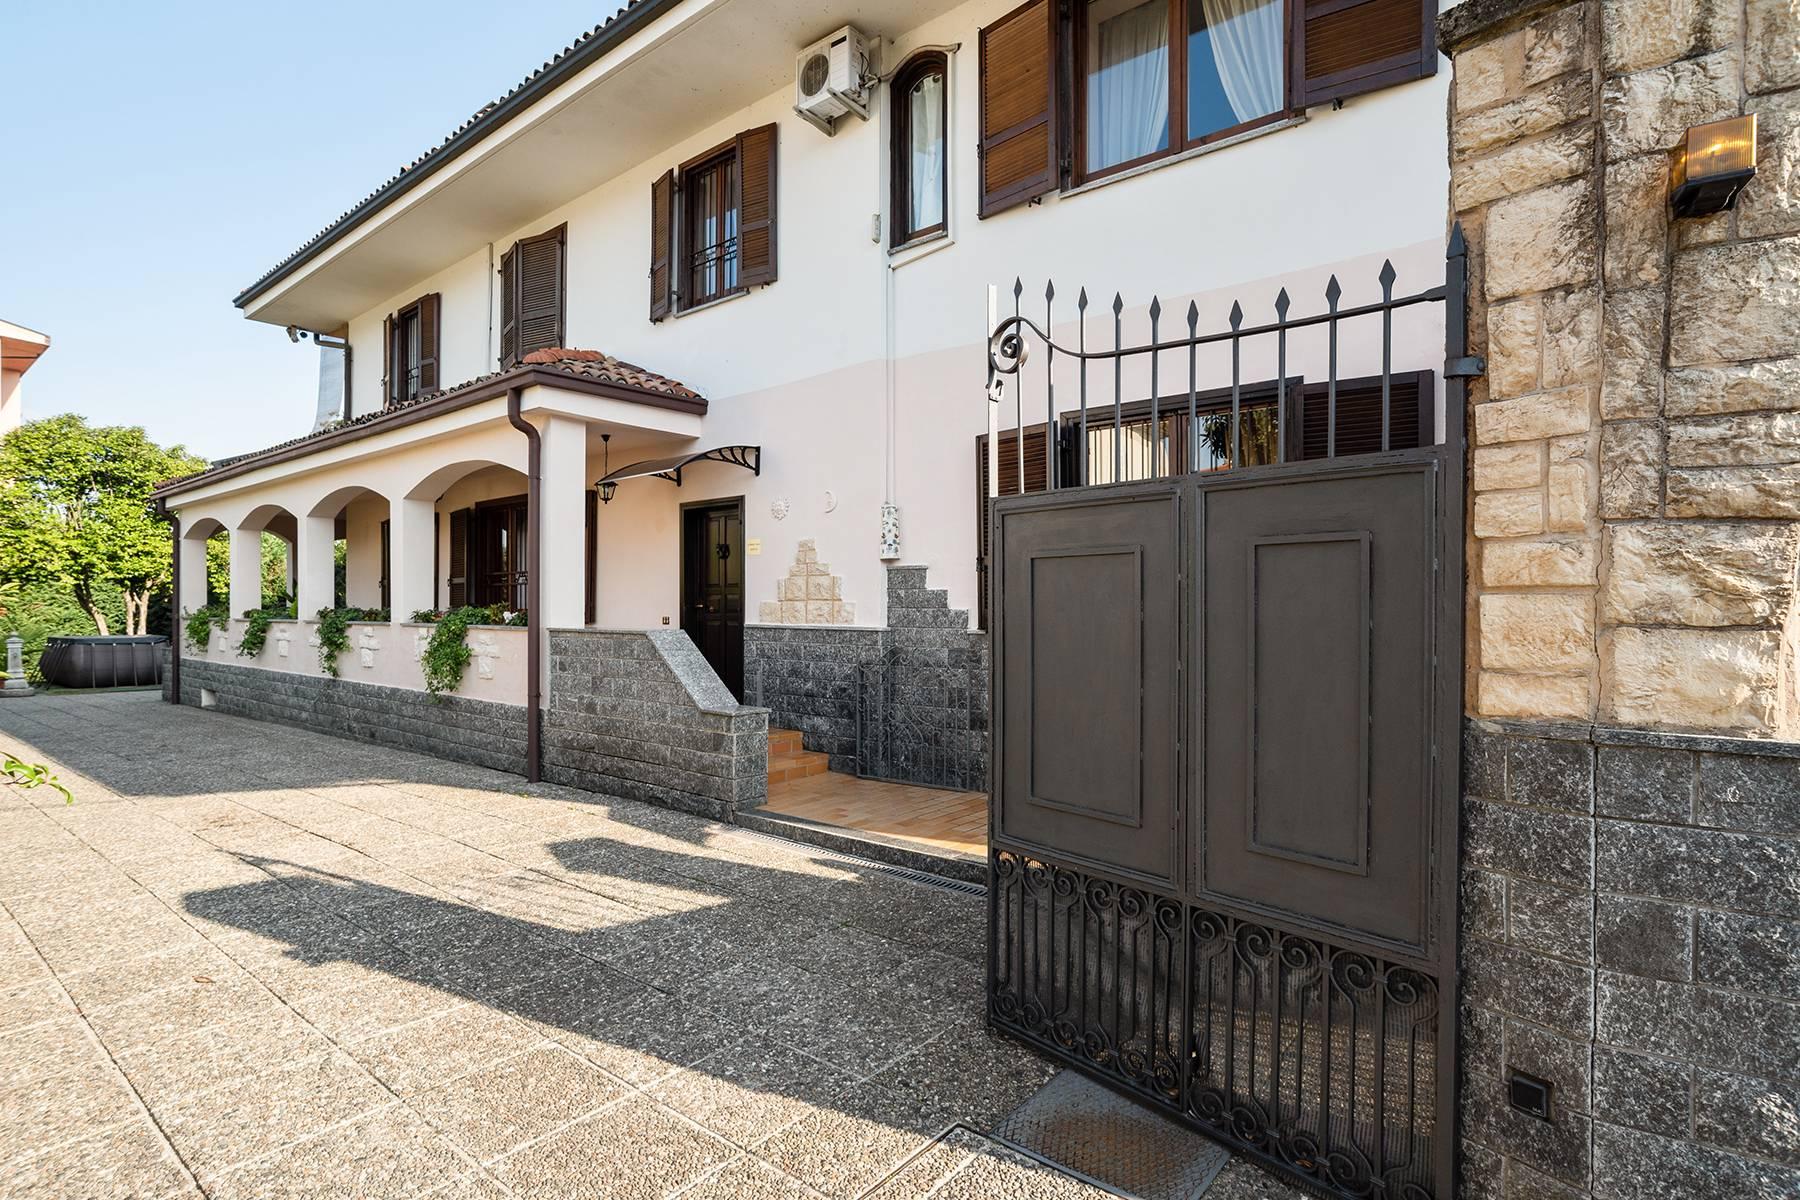 Independent villa a few steps from the heart of Arona - 3